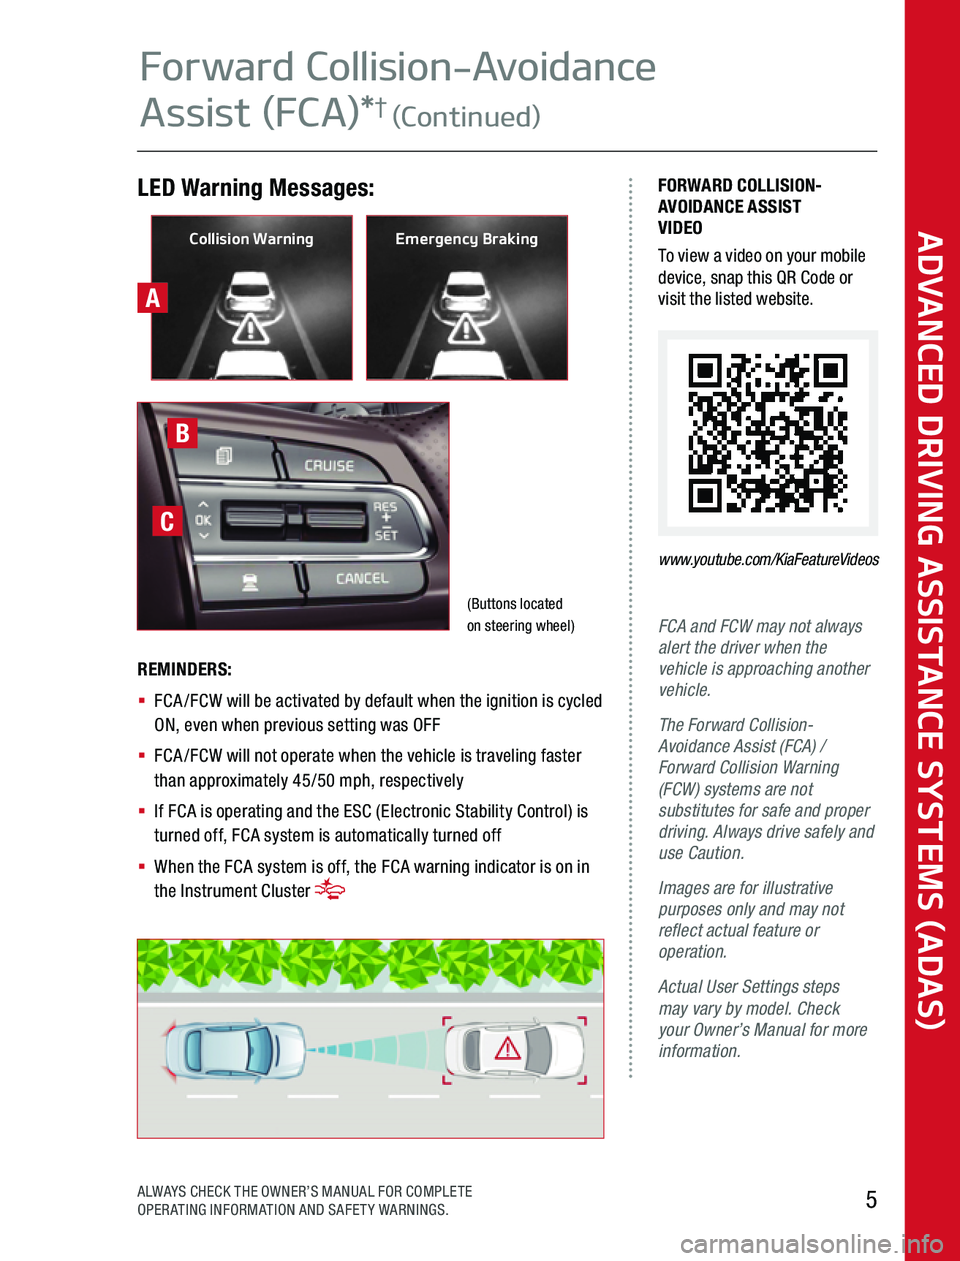 KIA RIO 2020  Advanced Driving Assistance System A
LED Warning Messages:FORWARD COLLISION-AVOIDANCE ASSIST VIDEOTo view a video on your mobile device, snap this QR Code or visit the listed website 
www.youtube.com/KiaFeatureVideos
FCA and FCW may no